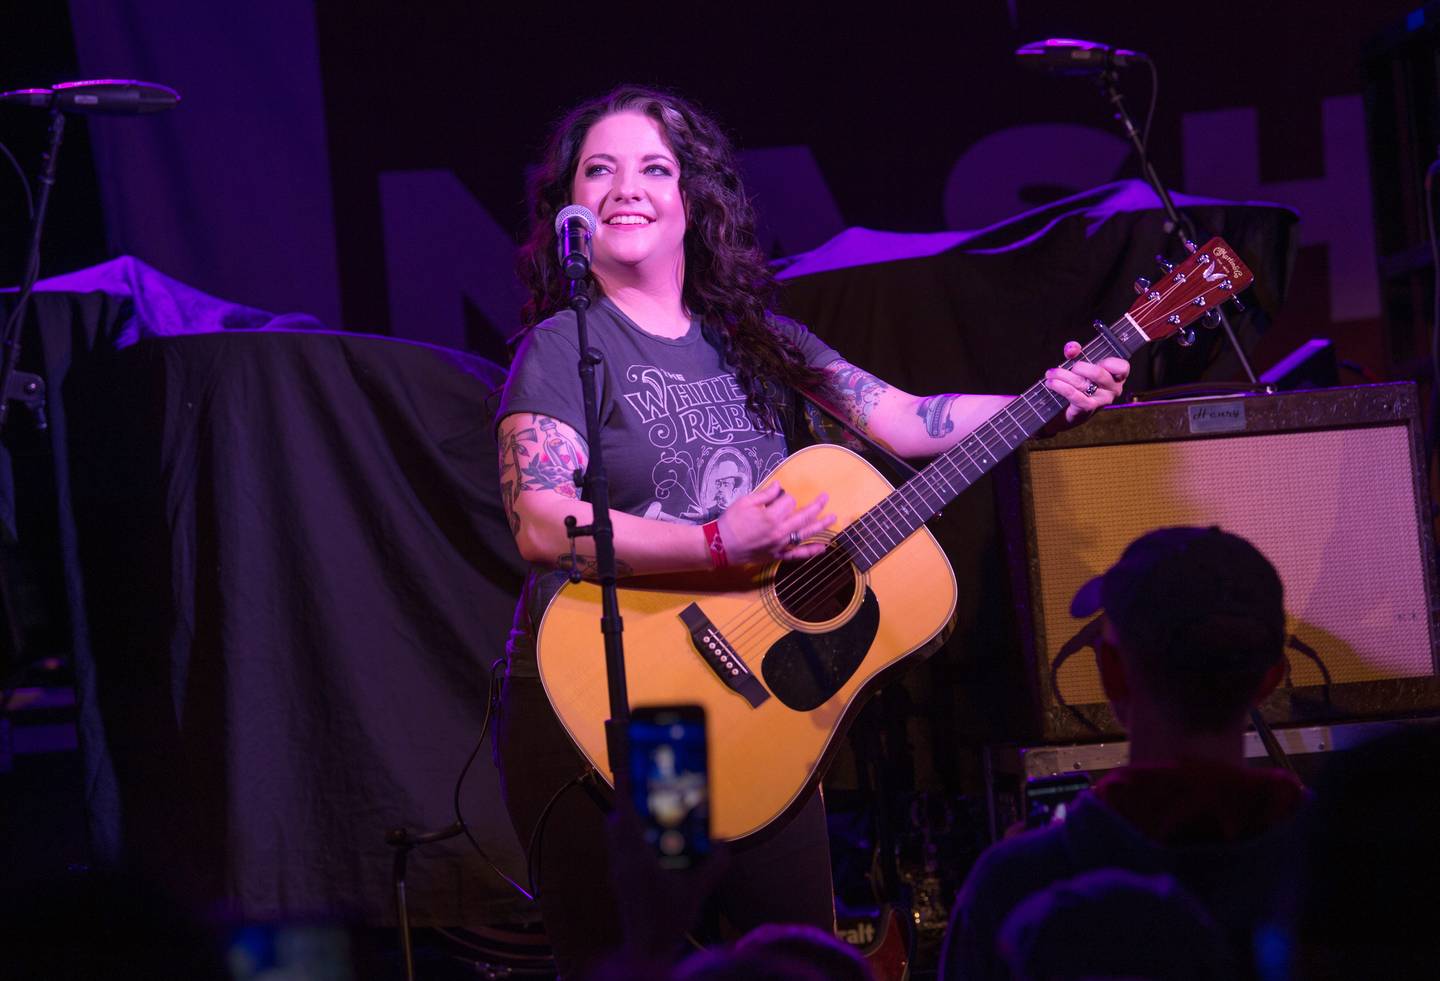 EXCLUSIVE: Ashley McBryde Inspires Young Music Fans Every Show | News | CMT